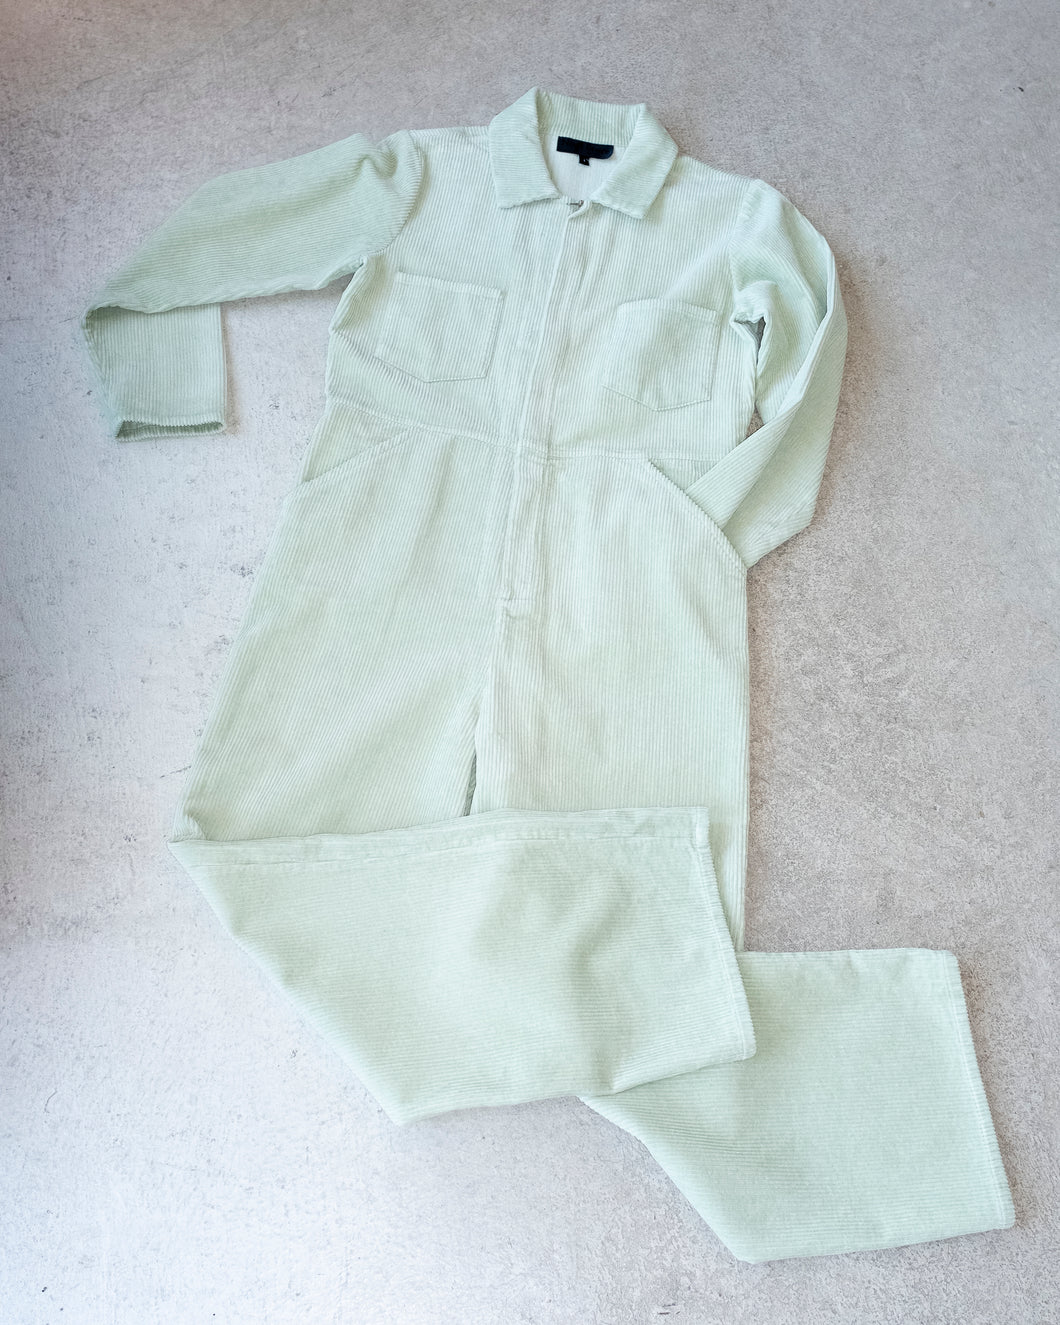 no 6 marlon jumpsuit in mint corduroy - flat front. this jumpsuit is comfy and looks thick but is actually mid weight.